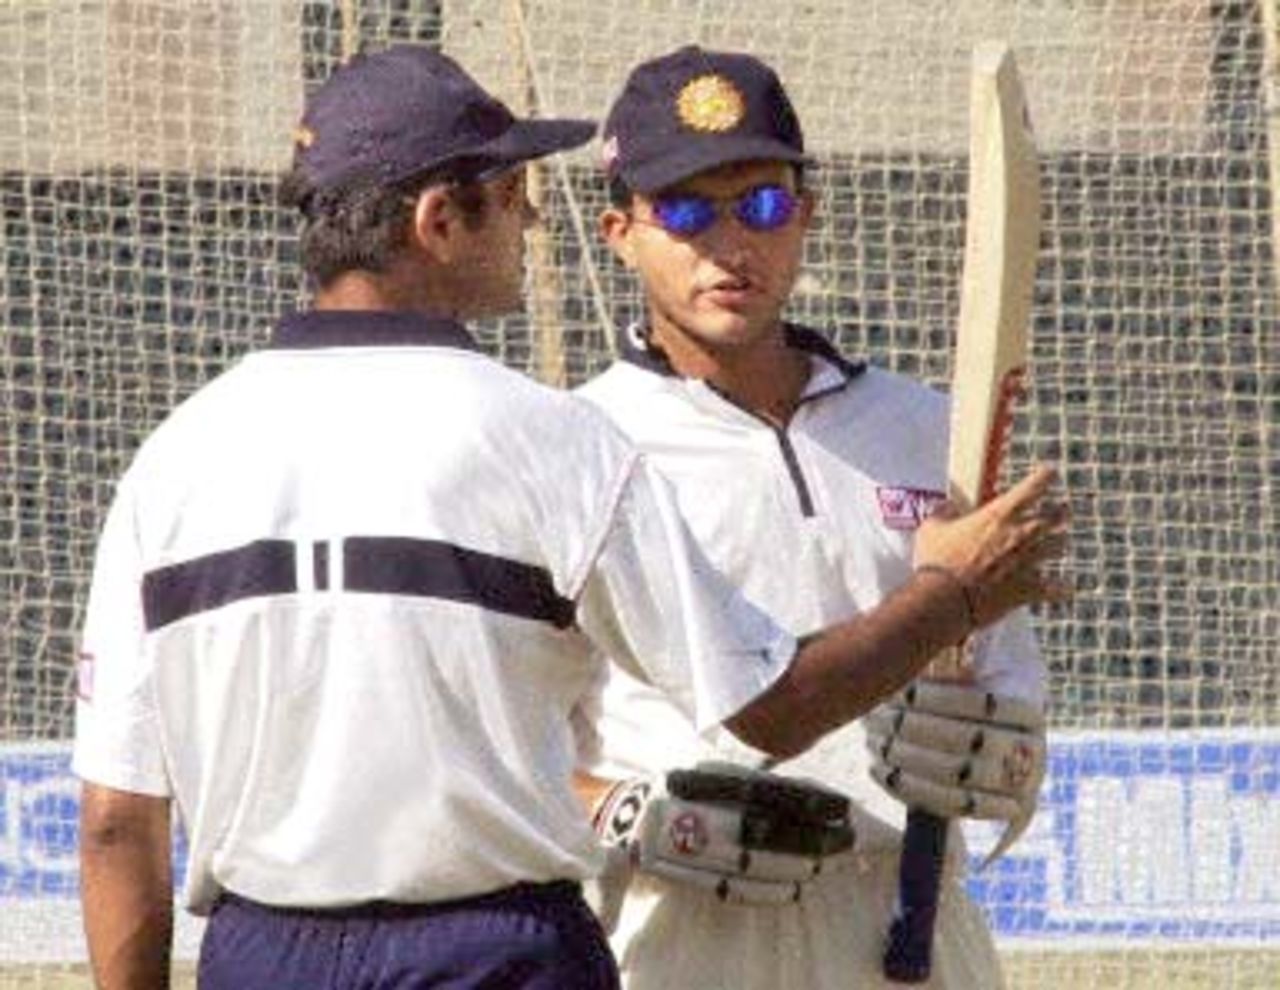 Suspended Indian cricket captain Sourav Ganguly (R) shows vice-captain Rahul Dravid (L) his bat in Rajkot, 13 December 2000. Dravid is taking over as captain of the Indian side for the final one-day international at the Municipal cricket ground at Rajkot. Ganguly has been suspended for one match as he breached the ICC code of conduct on three counts during play in Kanpur.